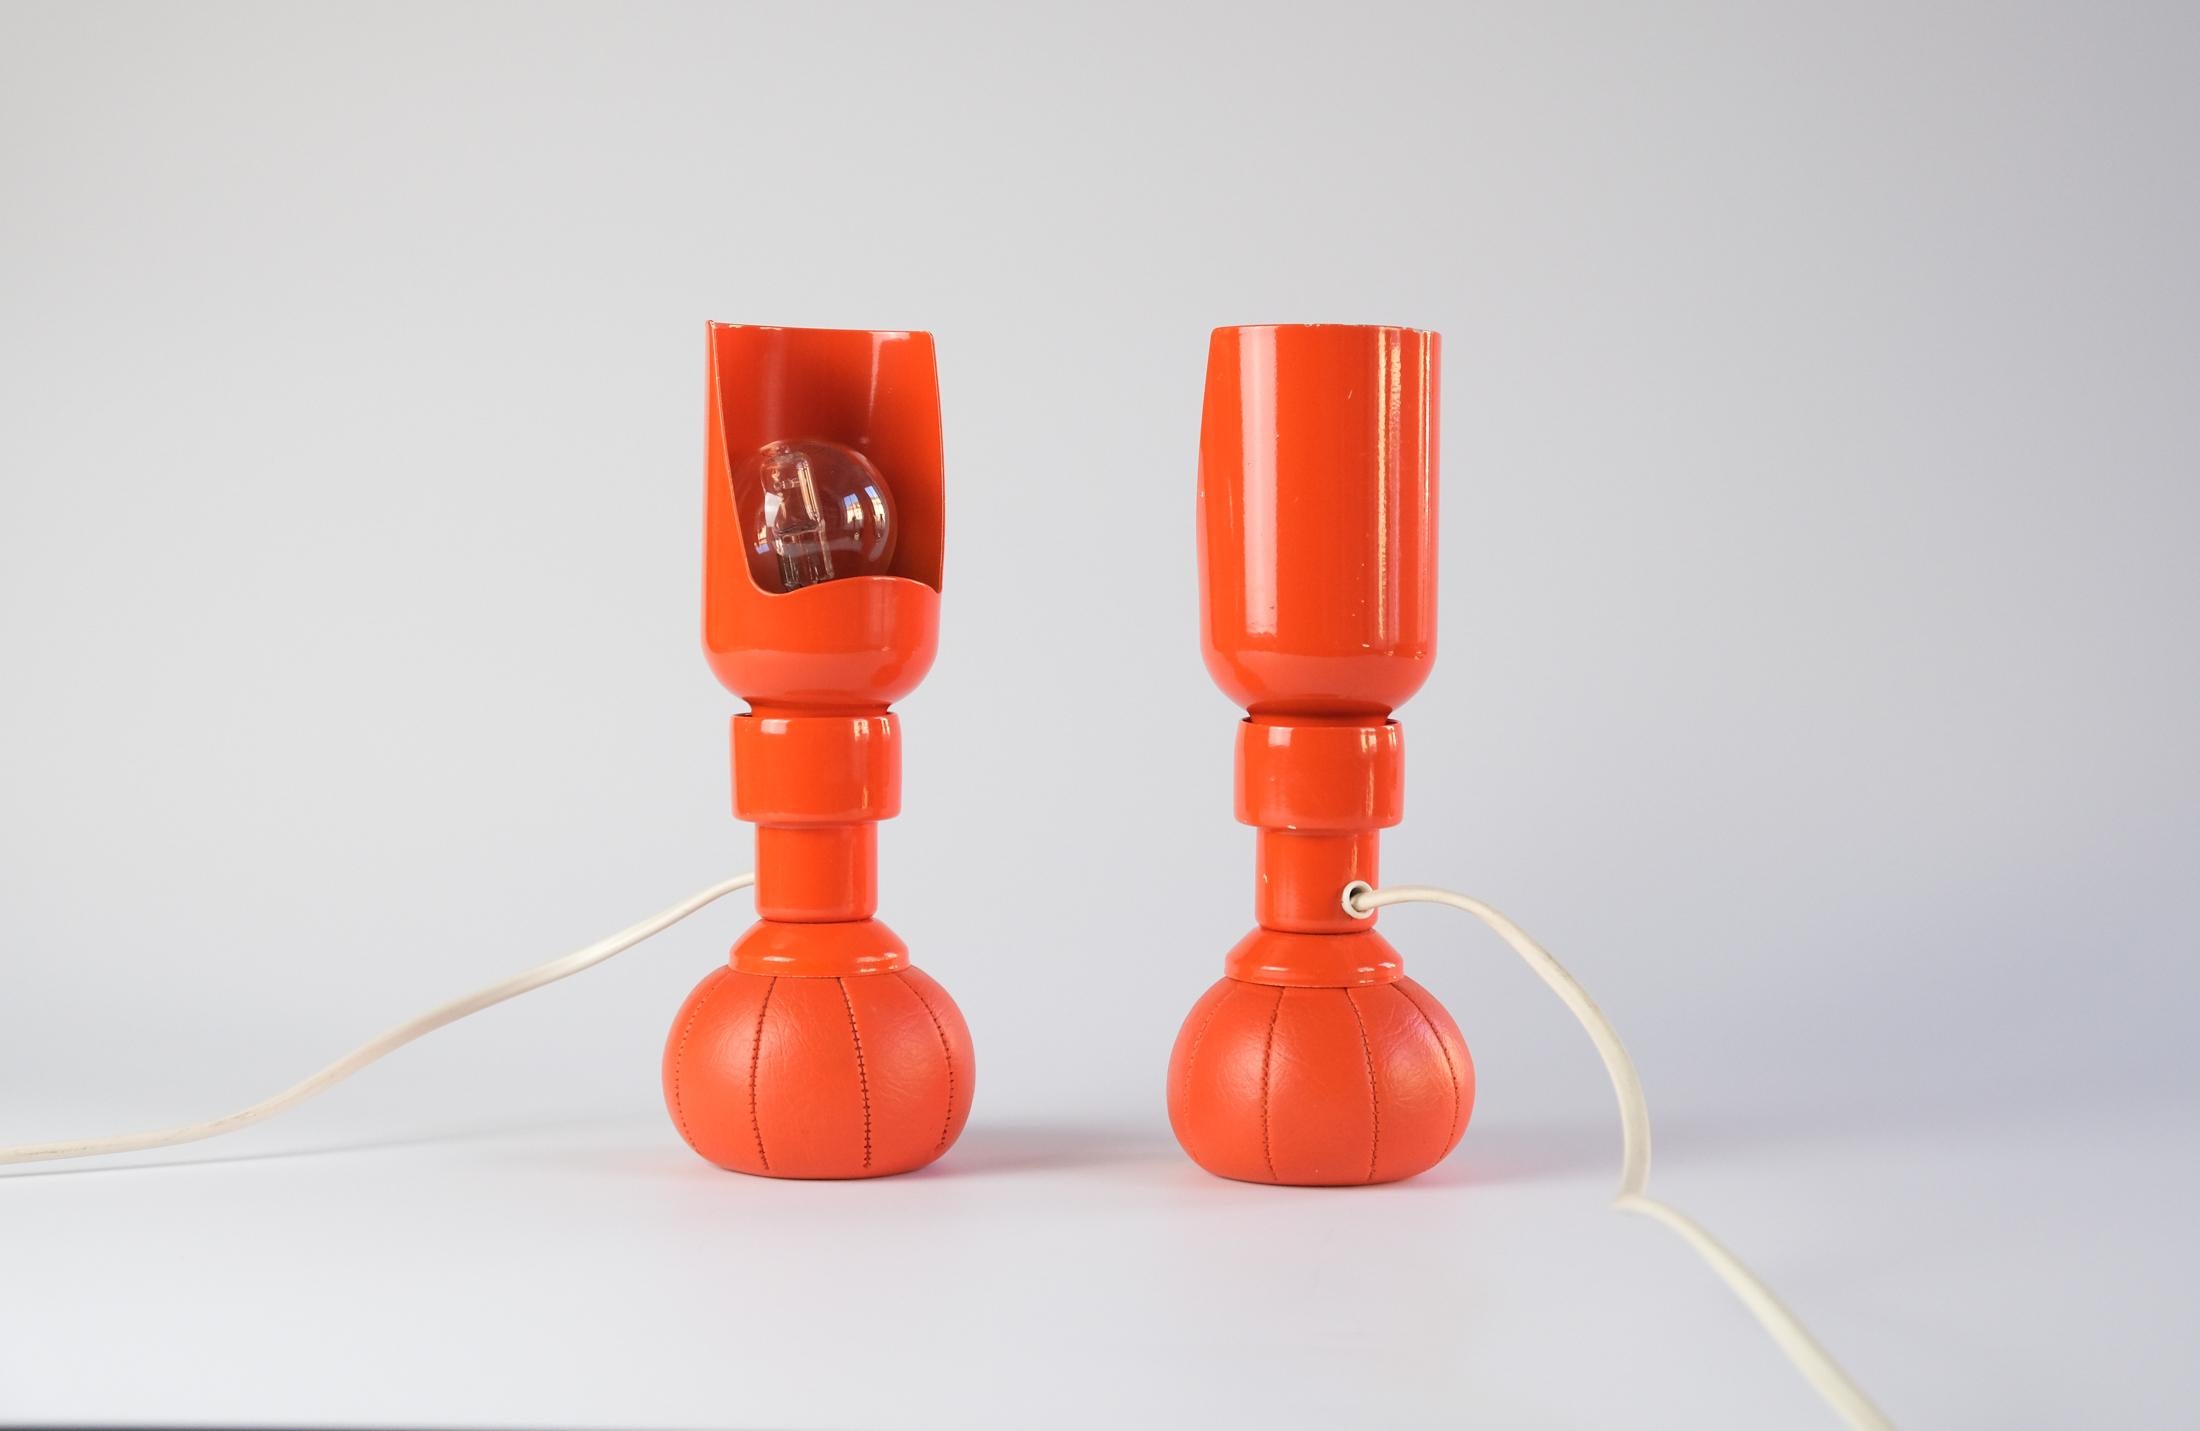 For sale are a pair of iconic and extremely rare orange 600P table lamps by GINO SARFATTI, designed in 1966 and produced by Arteluce of Italy.

Thanks to their lead-filled weighted pouch bases, the lamps can be placed at any angle and the reflector